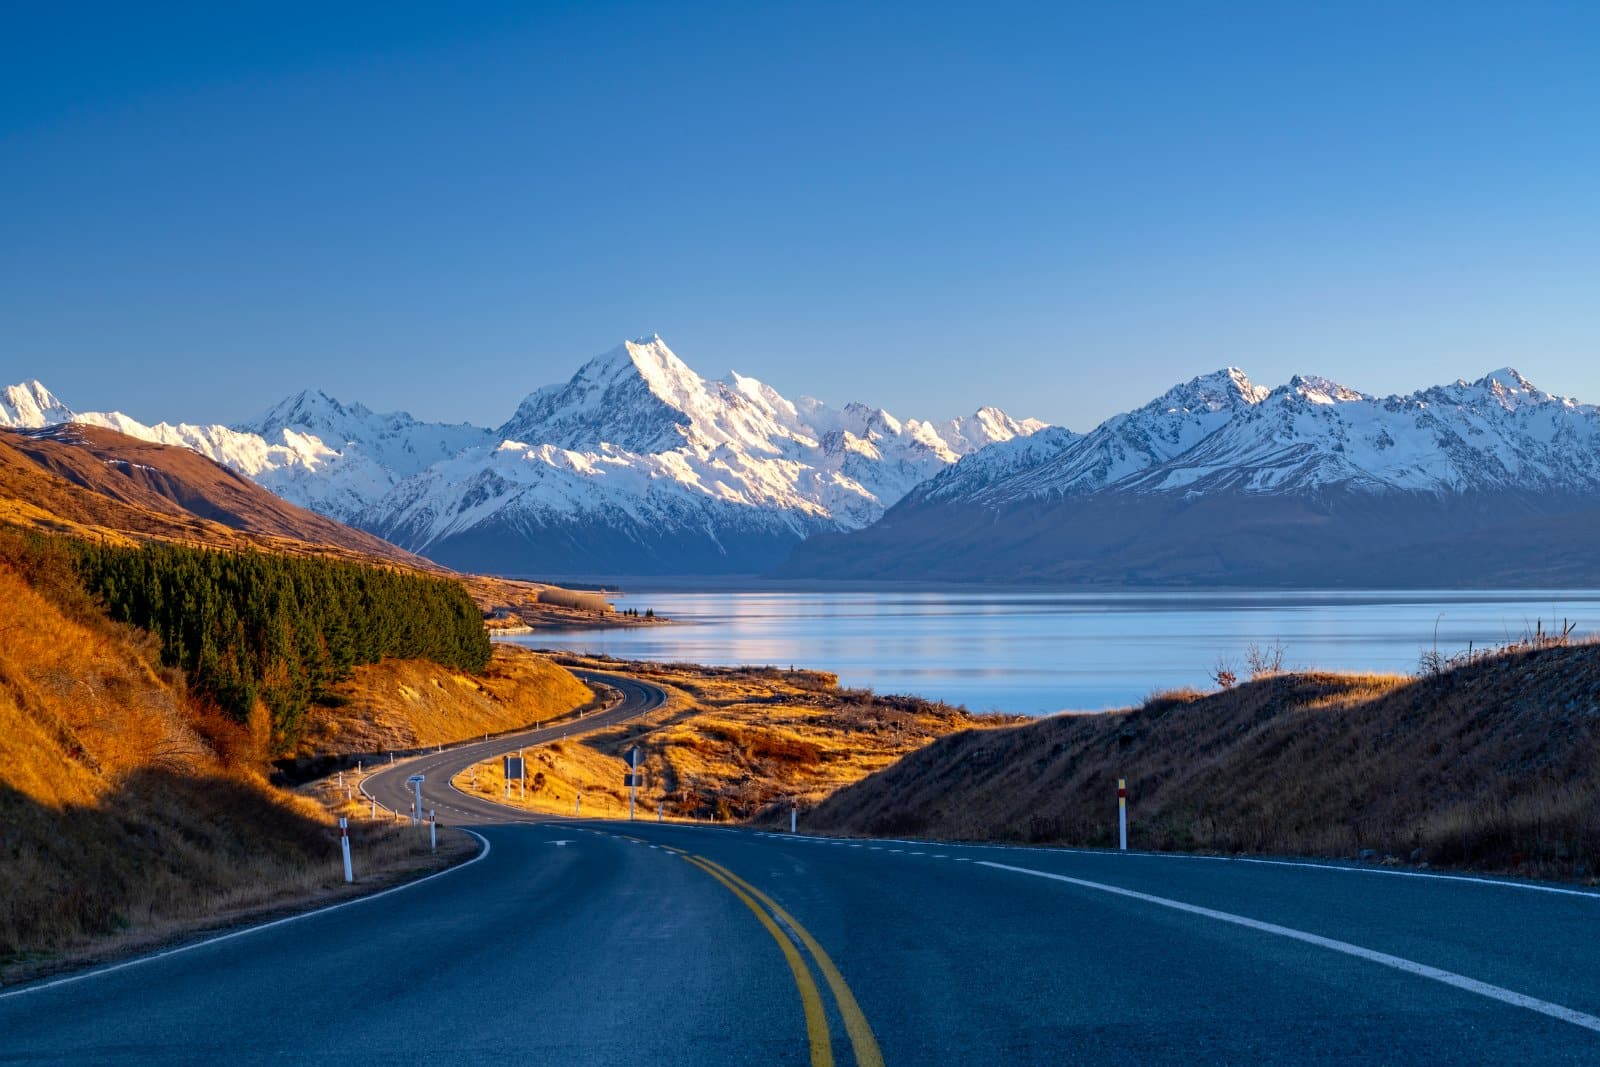 <p class="wp-caption-text">Image Credit: Shutterstock / Nur Ismail Photography</p>  <p><span>New Zealand’s South Island is a road tripper’s dream, with the Southern Alps, fiords, and lakes providing a backdrop to an epic journey through Middle-earth.</span></p>